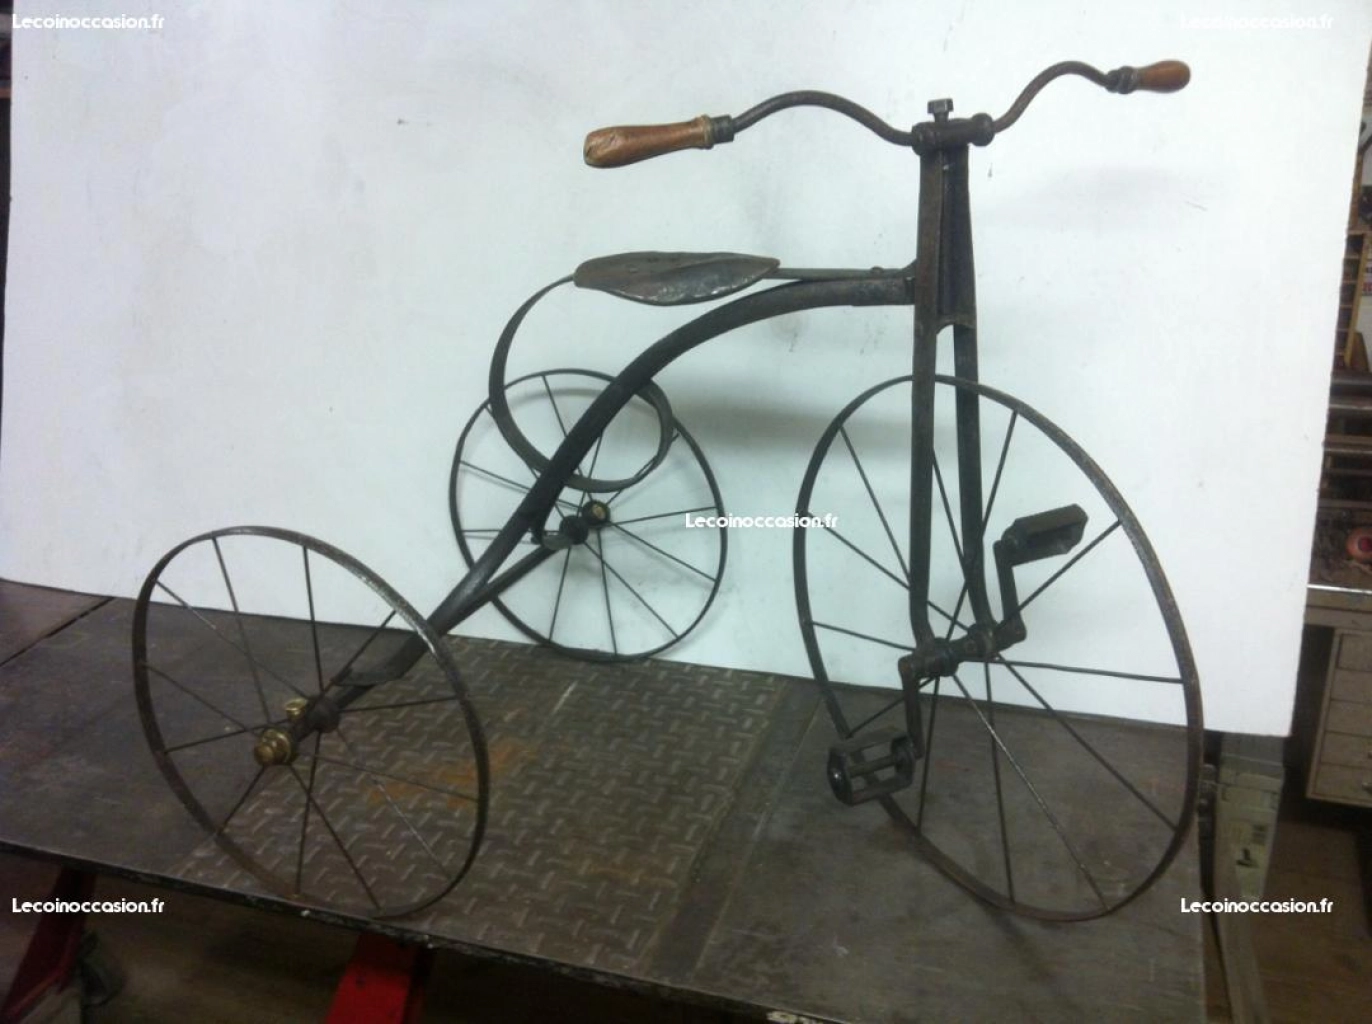 Tricycle 19 eme siecle